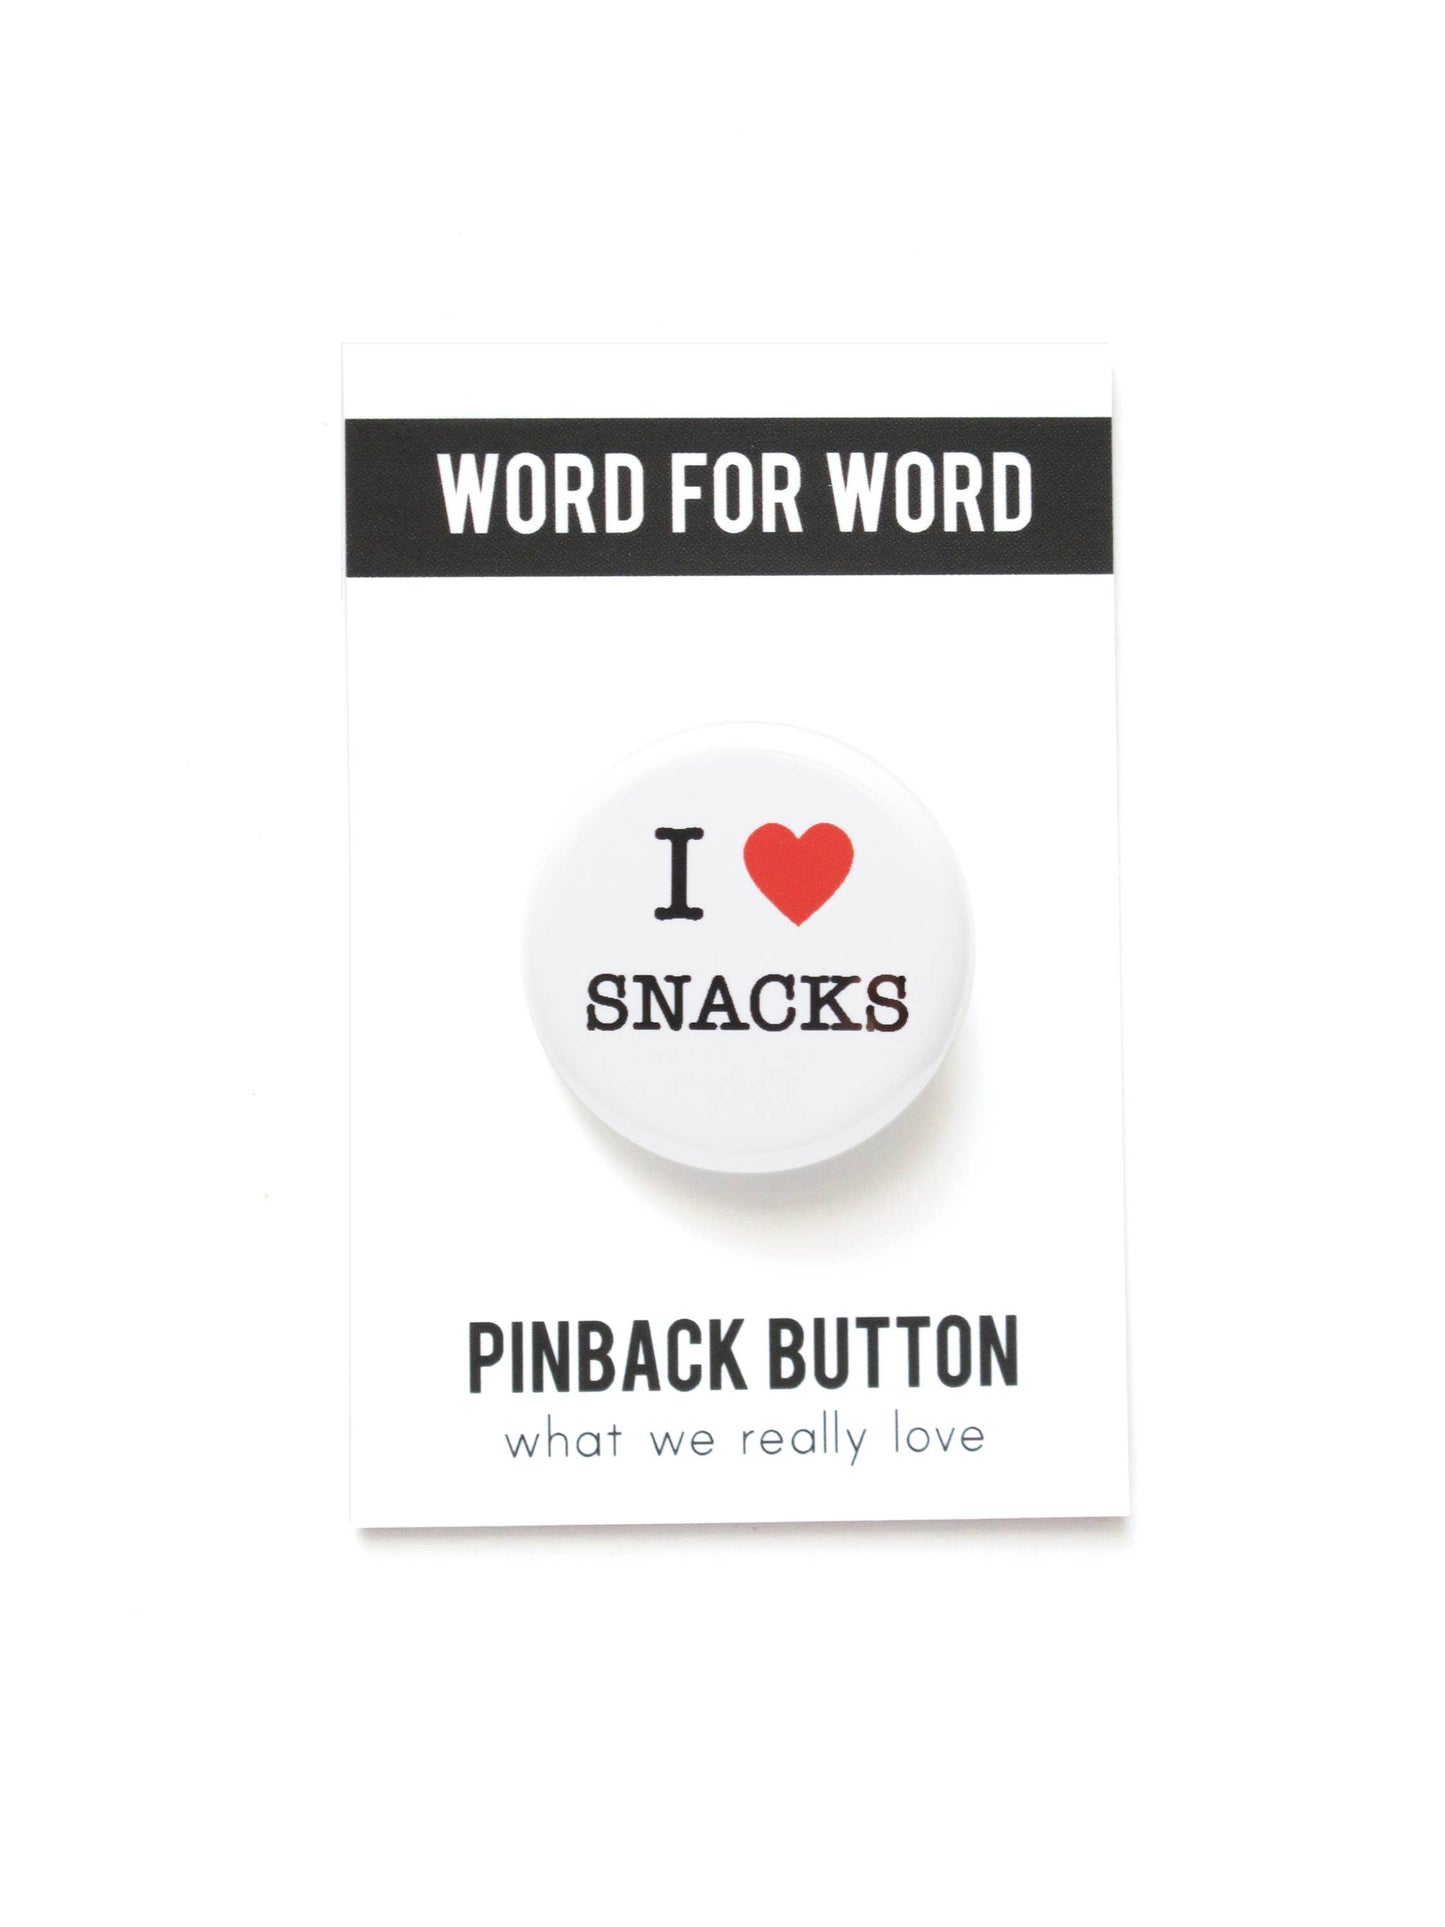 WORD FOR WORD Factory - I LOVE SNACKS Pinback Button